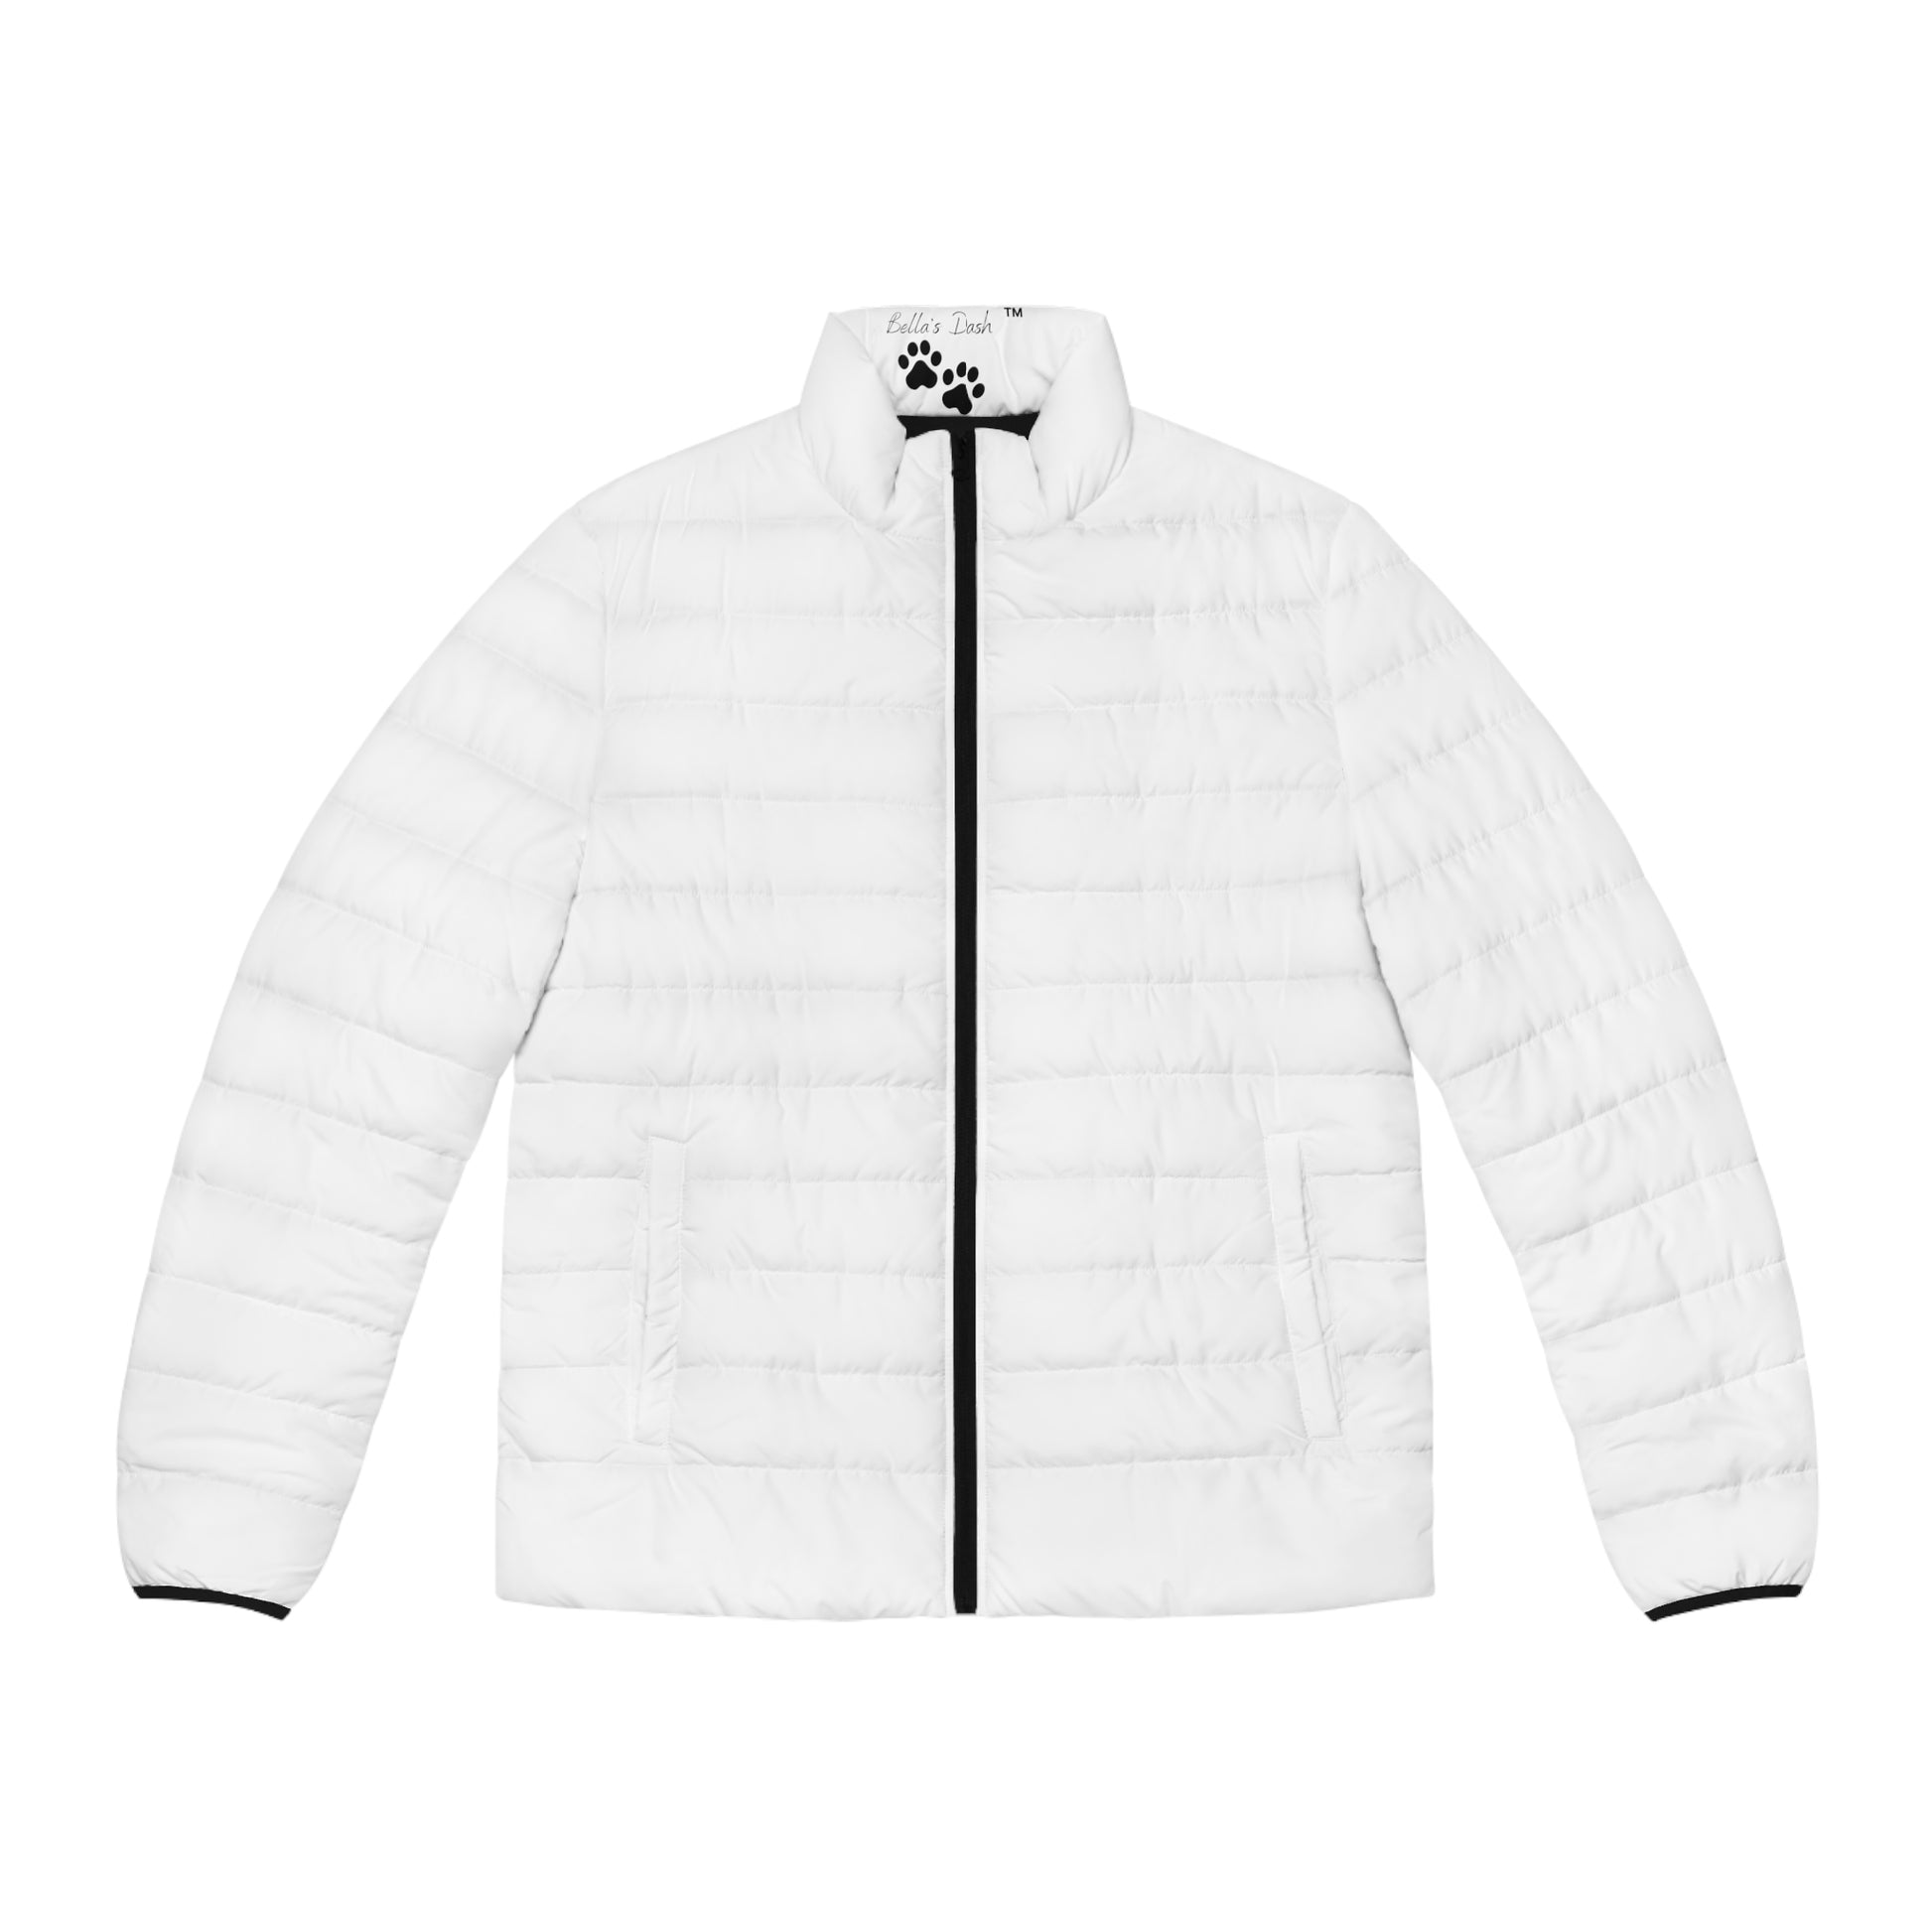 Essential Puffer Jacker in White front view